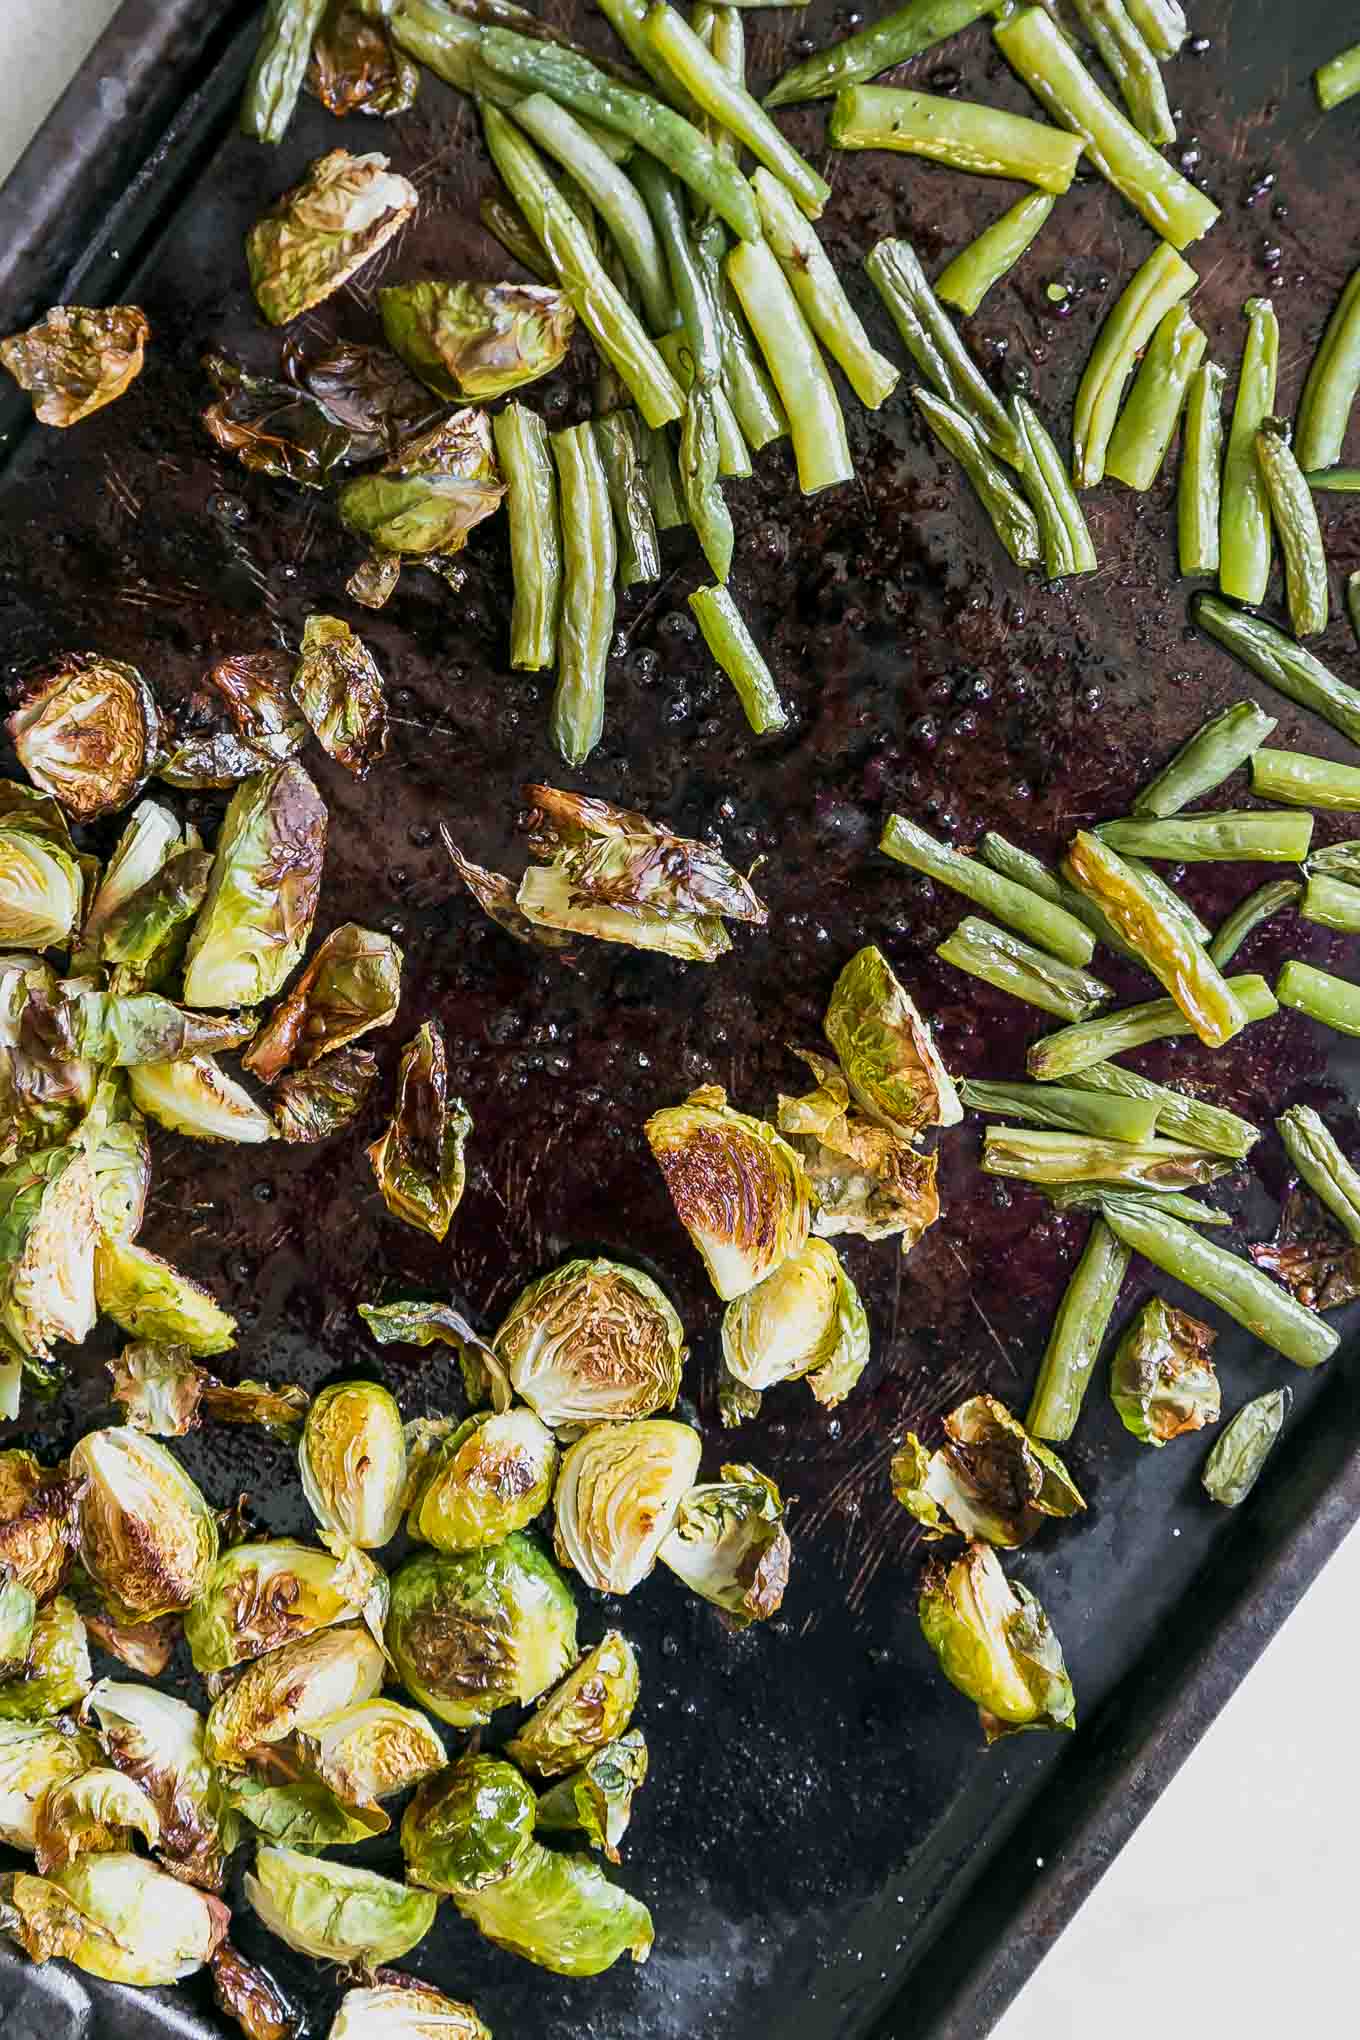 green beans and brussels sprouts on a roasting pan after baking